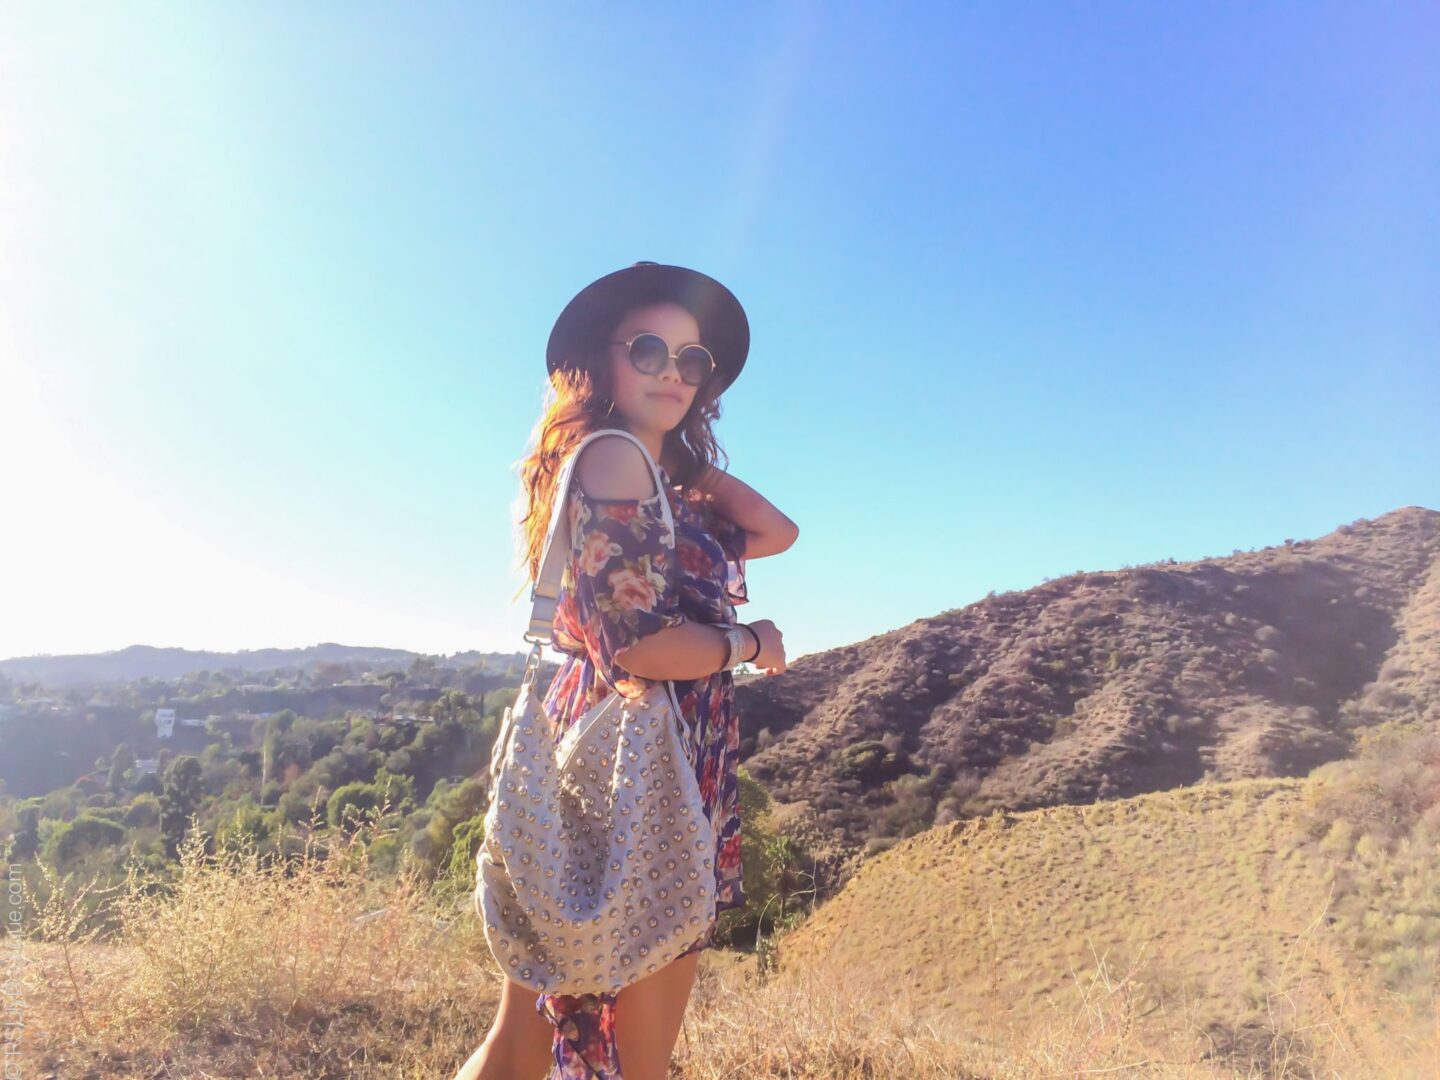 halloween-instagram-pslilyboutique-los-angeles-fashion-blogger-ootd-fall-2015-outfit-ideas-10-31-15